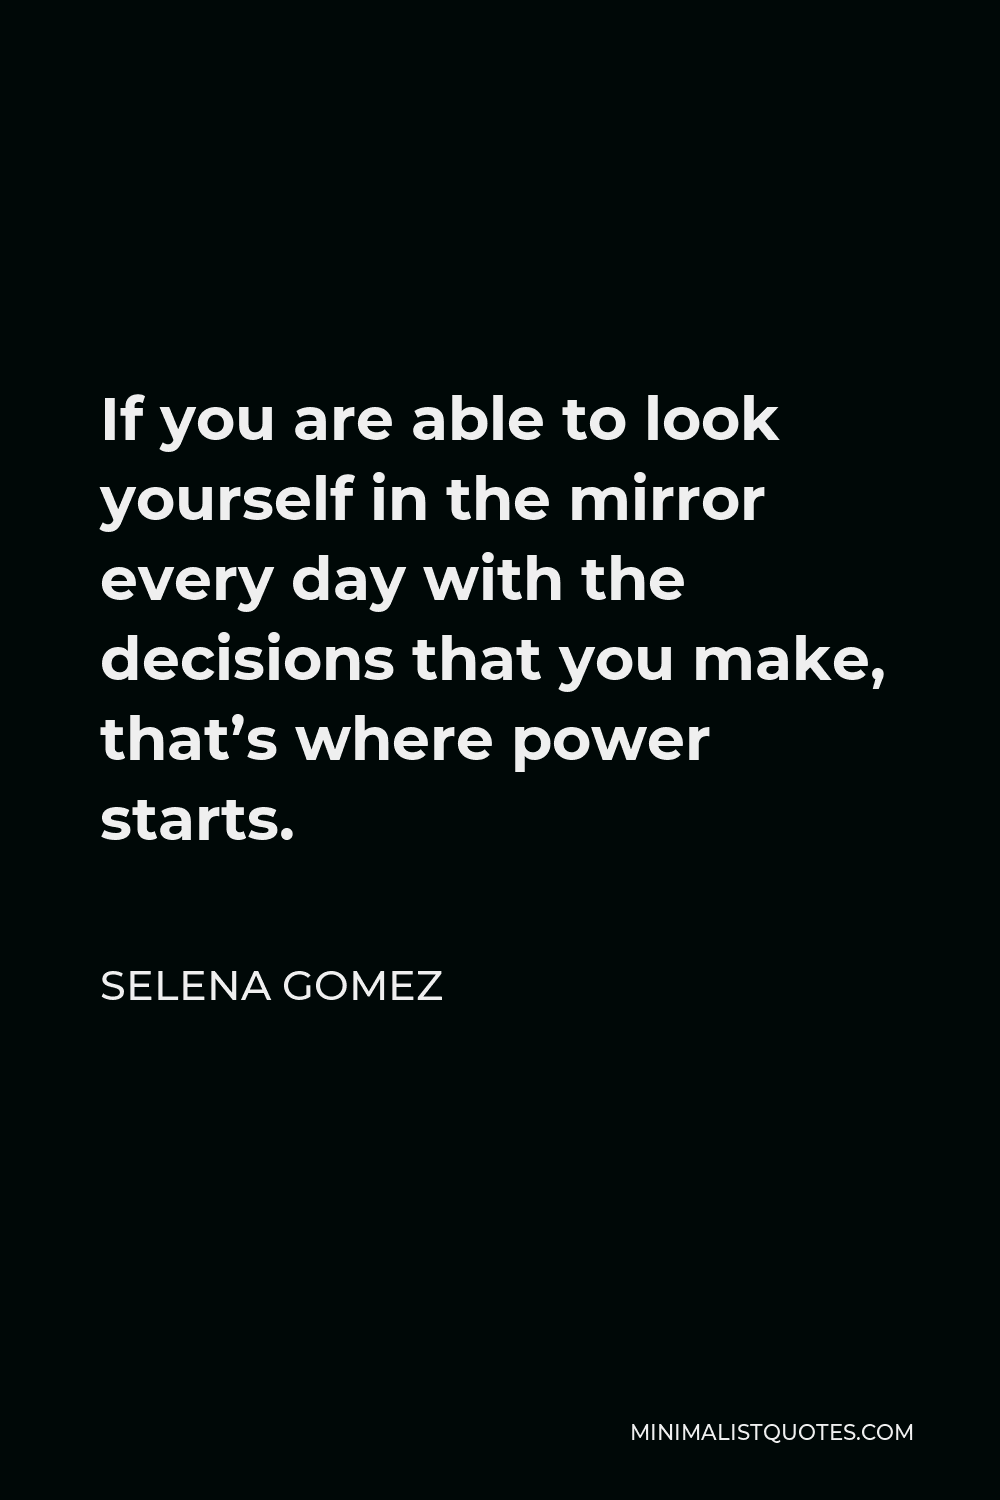 Selena Gomez Quote - If you are able to look yourself in the mirror every day with the decisions that you make, that’s where power starts.